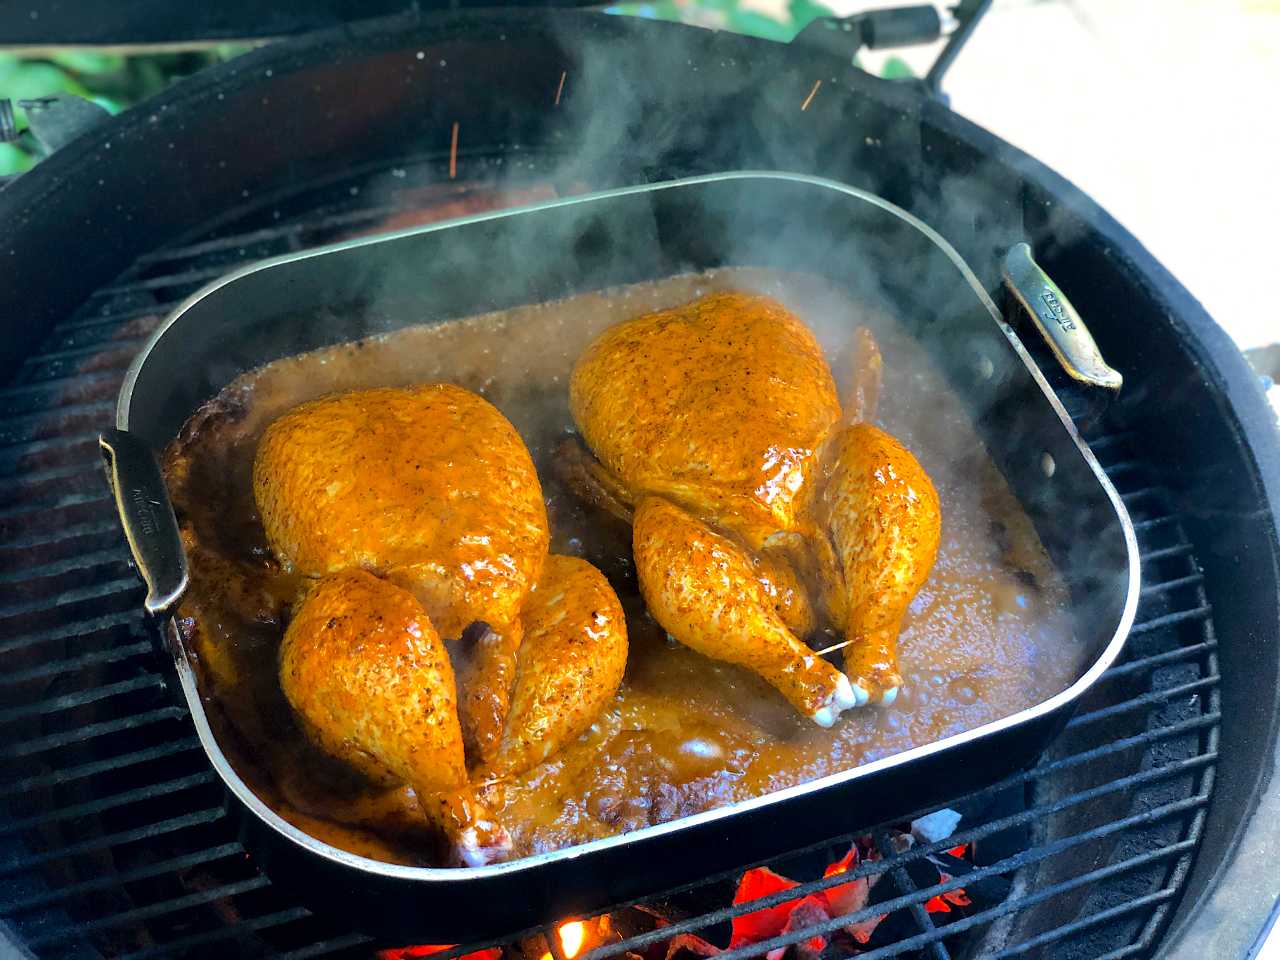 Chile roasted chicken